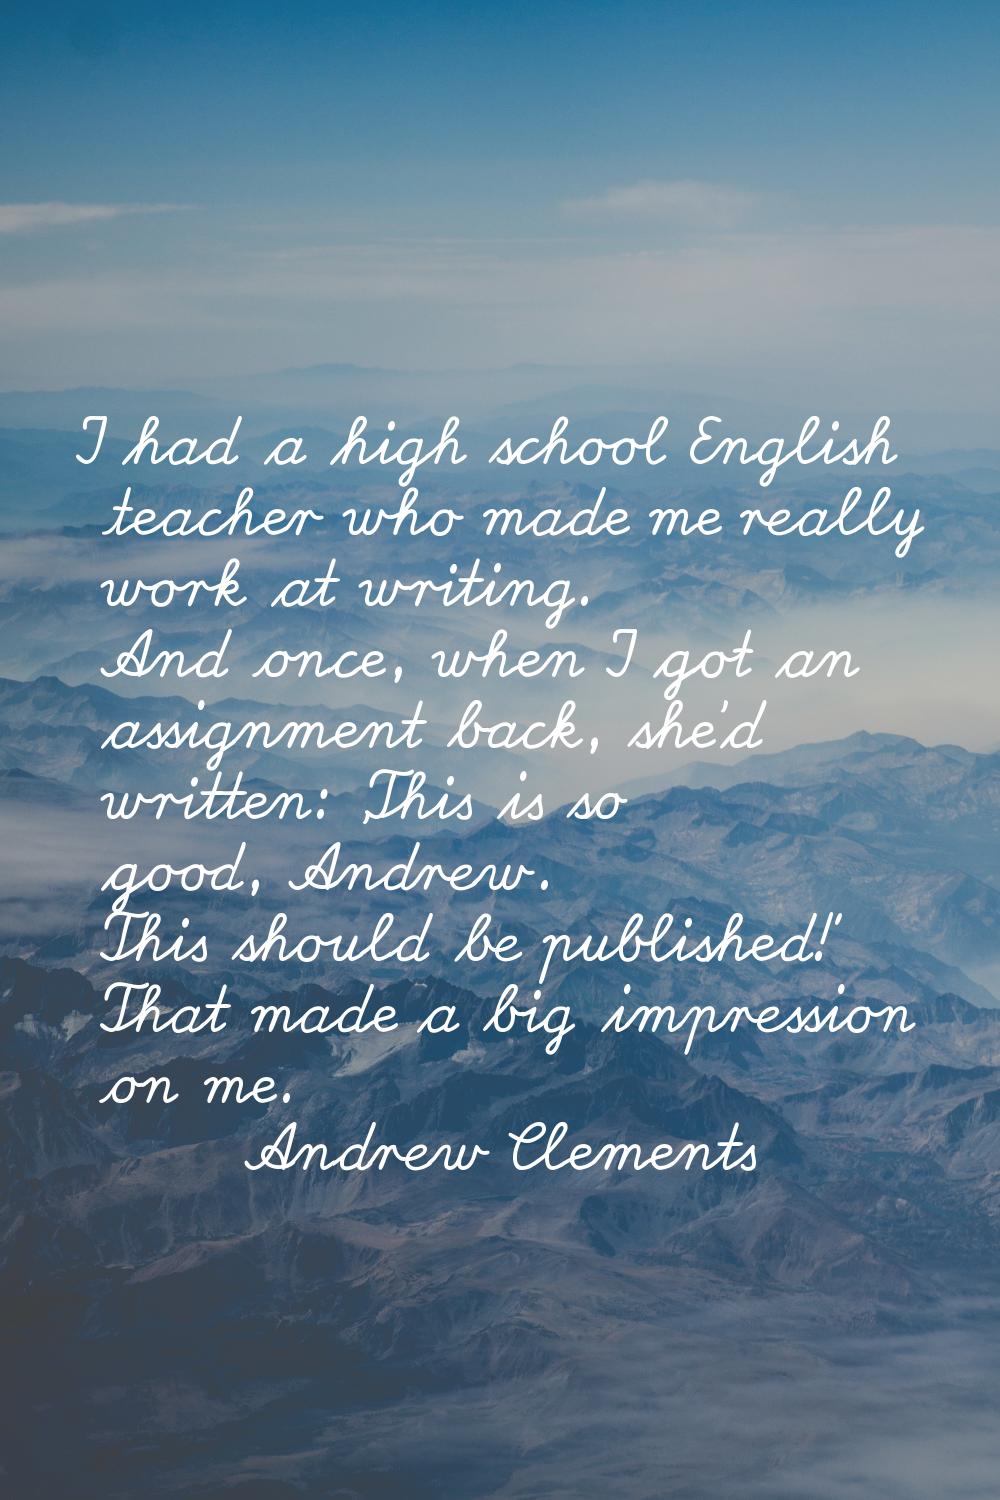 I had a high school English teacher who made me really work at writing. And once, when I got an ass